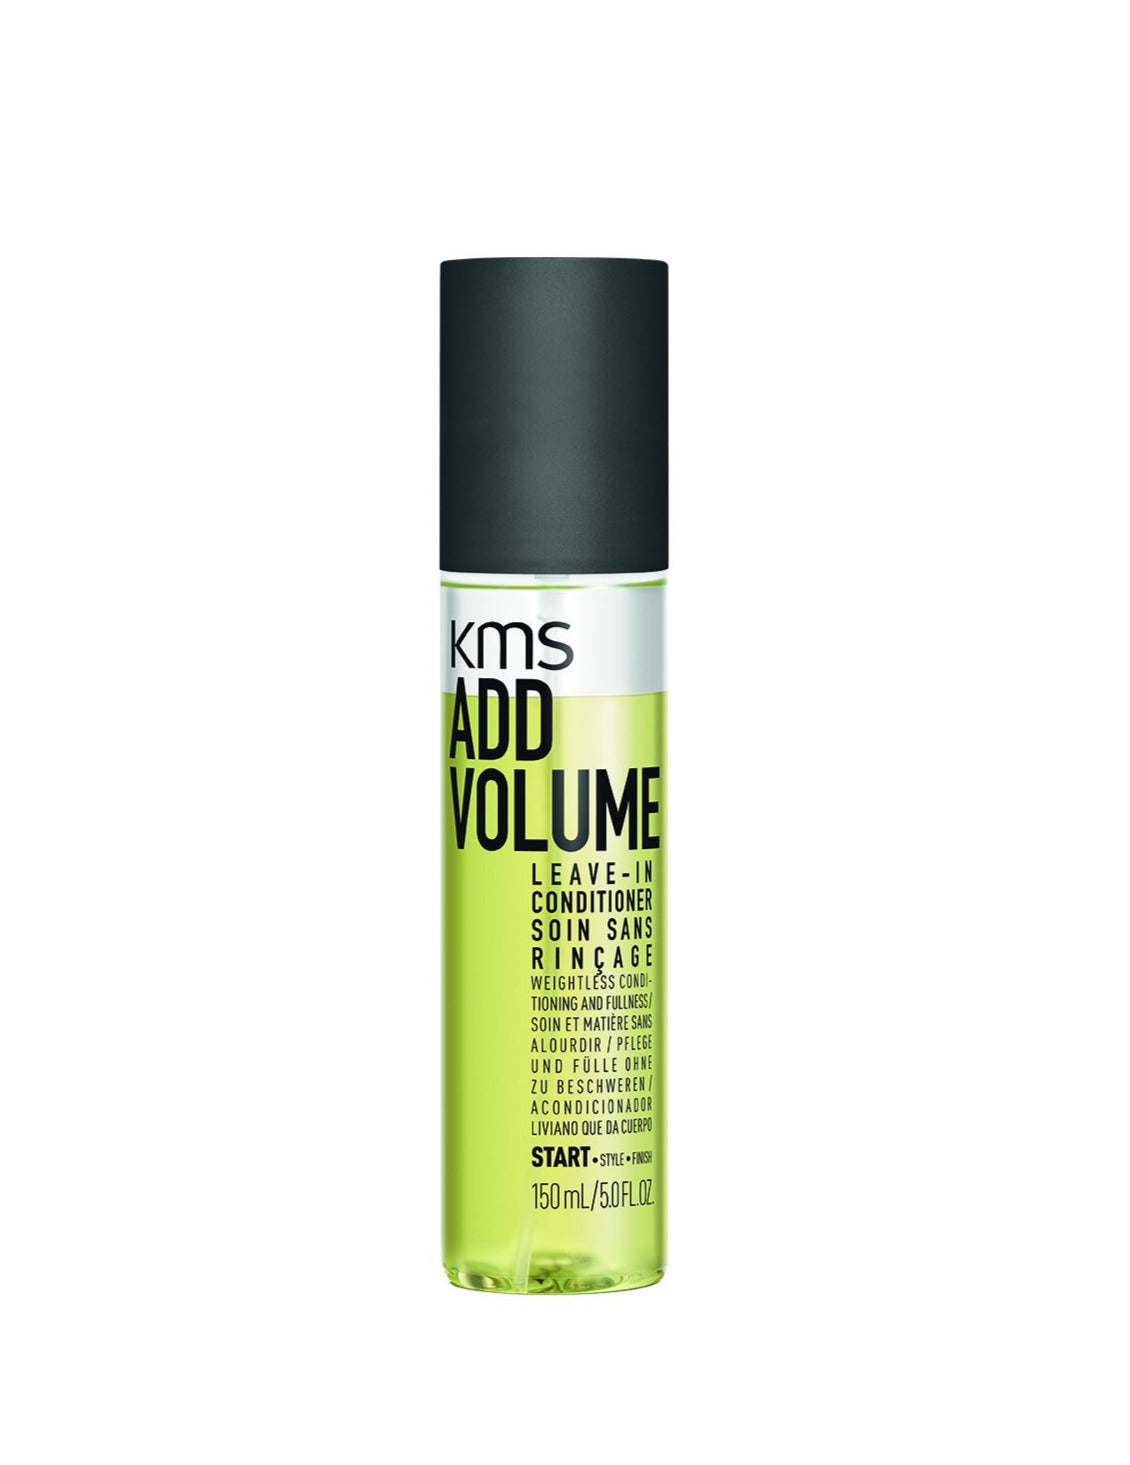 KMS Addvolume Leave-in Conditioner